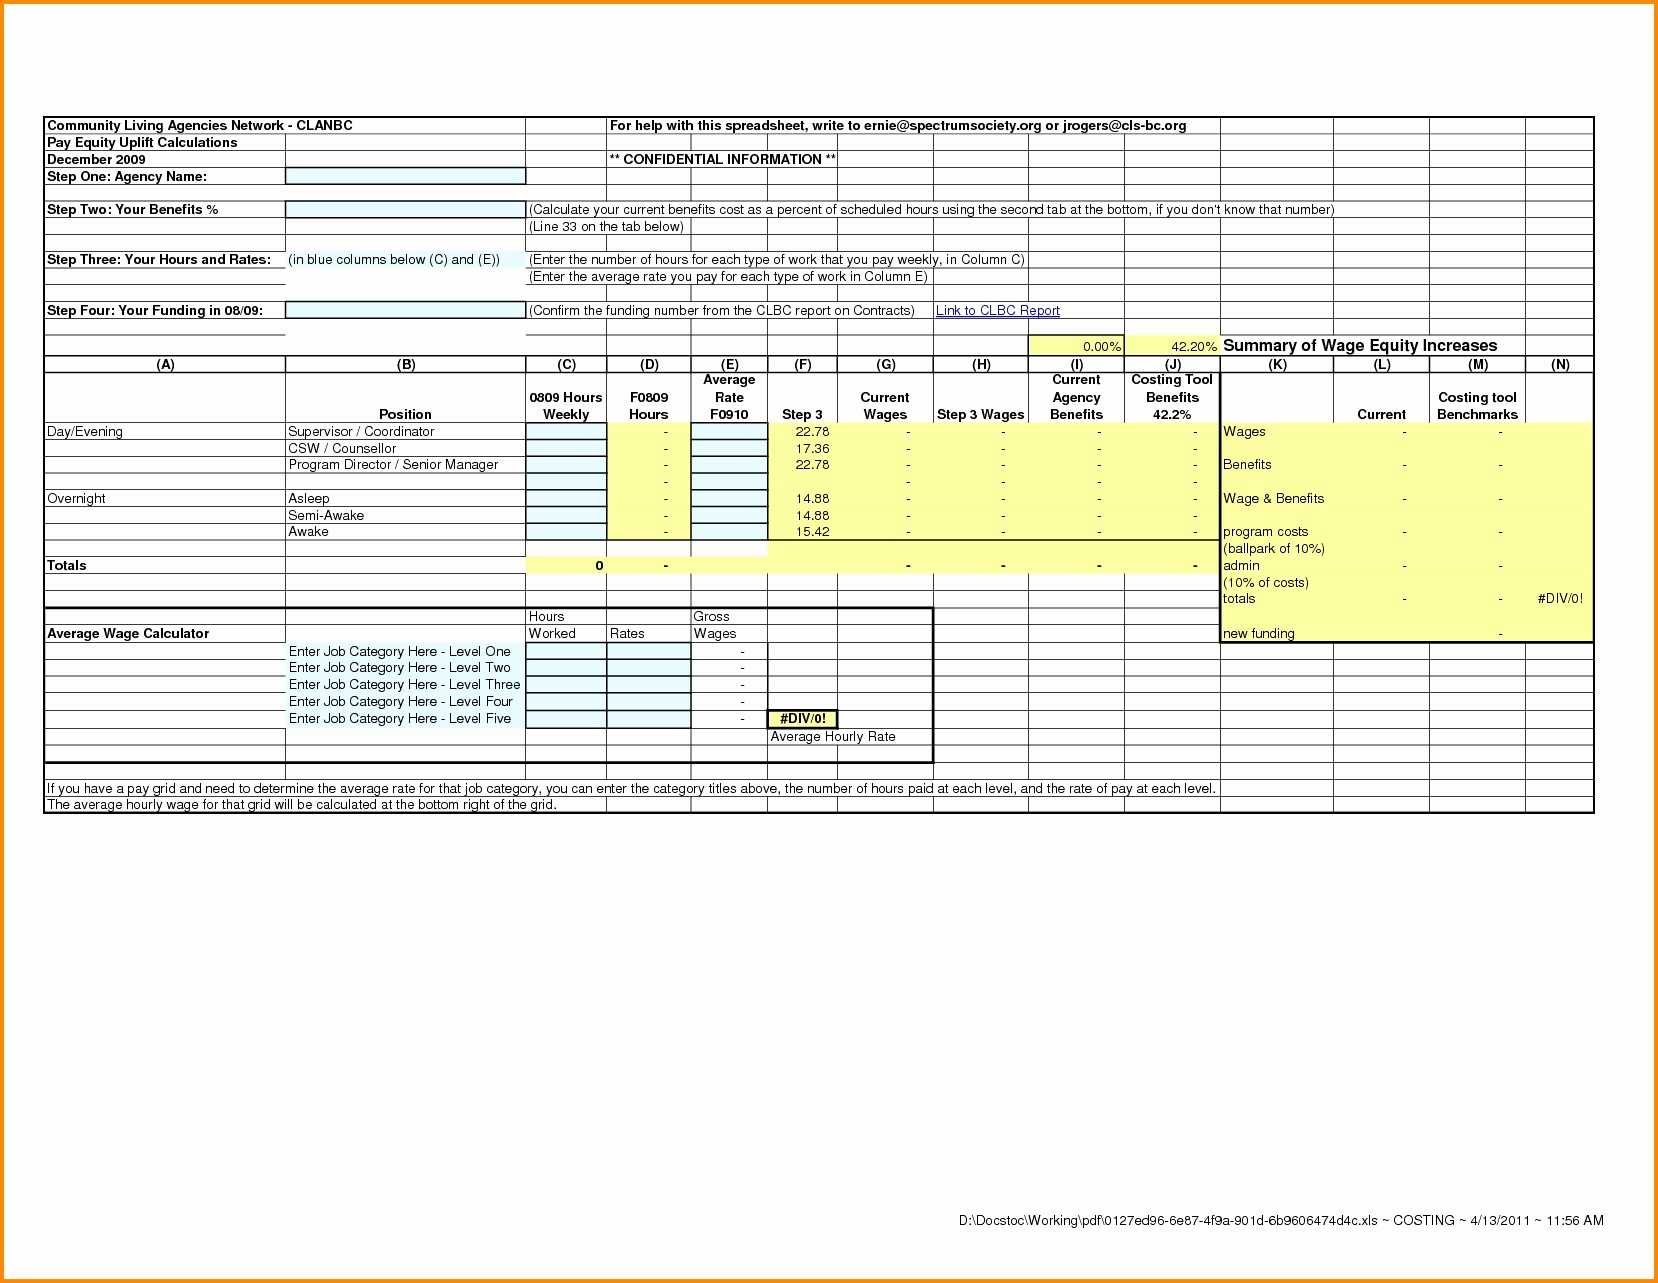 Underwriting Income Calculation Worksheet Along with Car Ing Spreadsheet Mini Mfagency